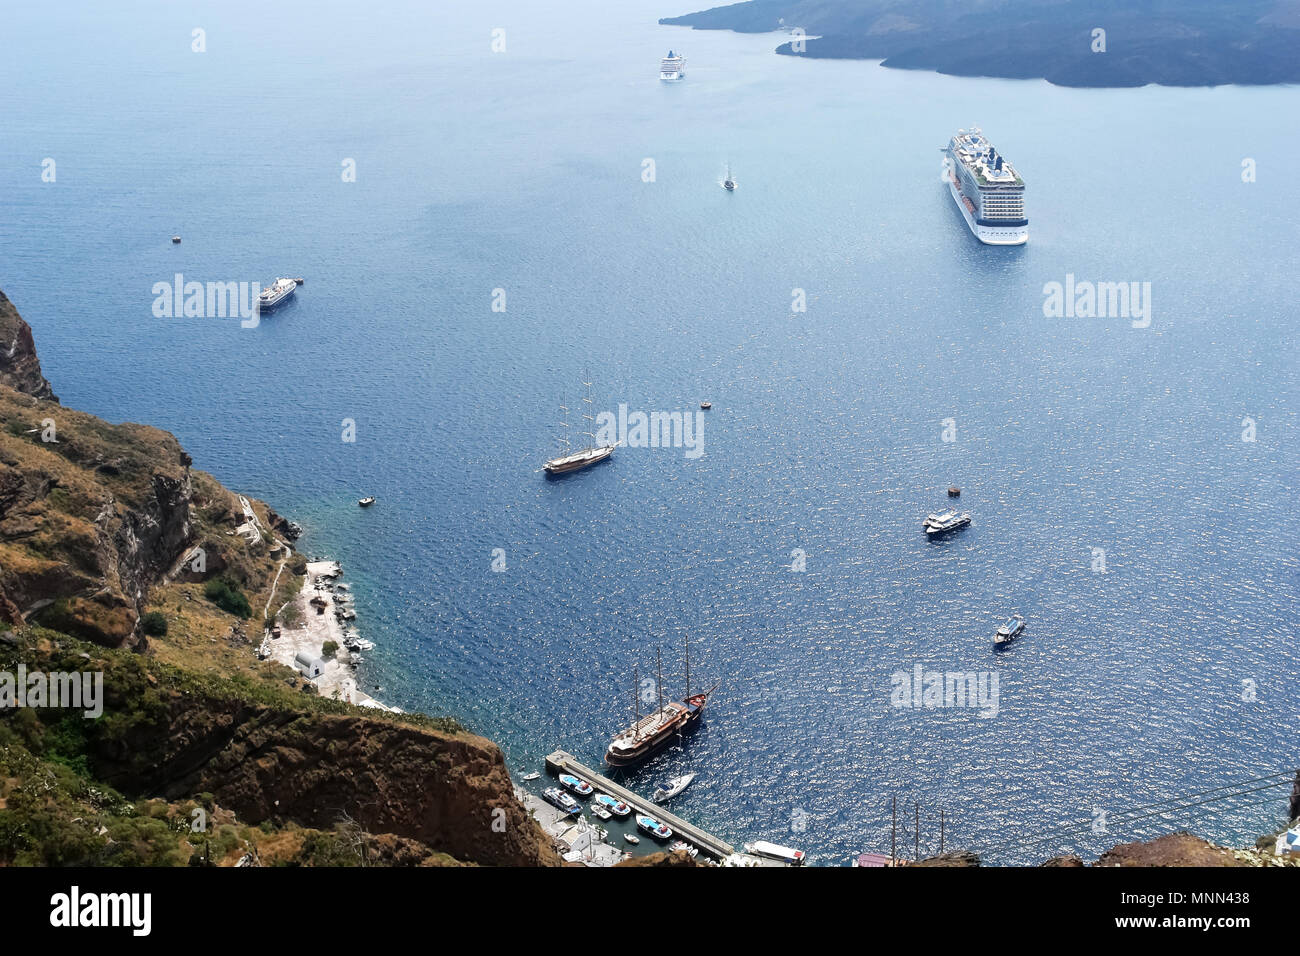 A view from above of the large and small ships in the bay of the volcanic island of Santorini, Greece. Stock Photo